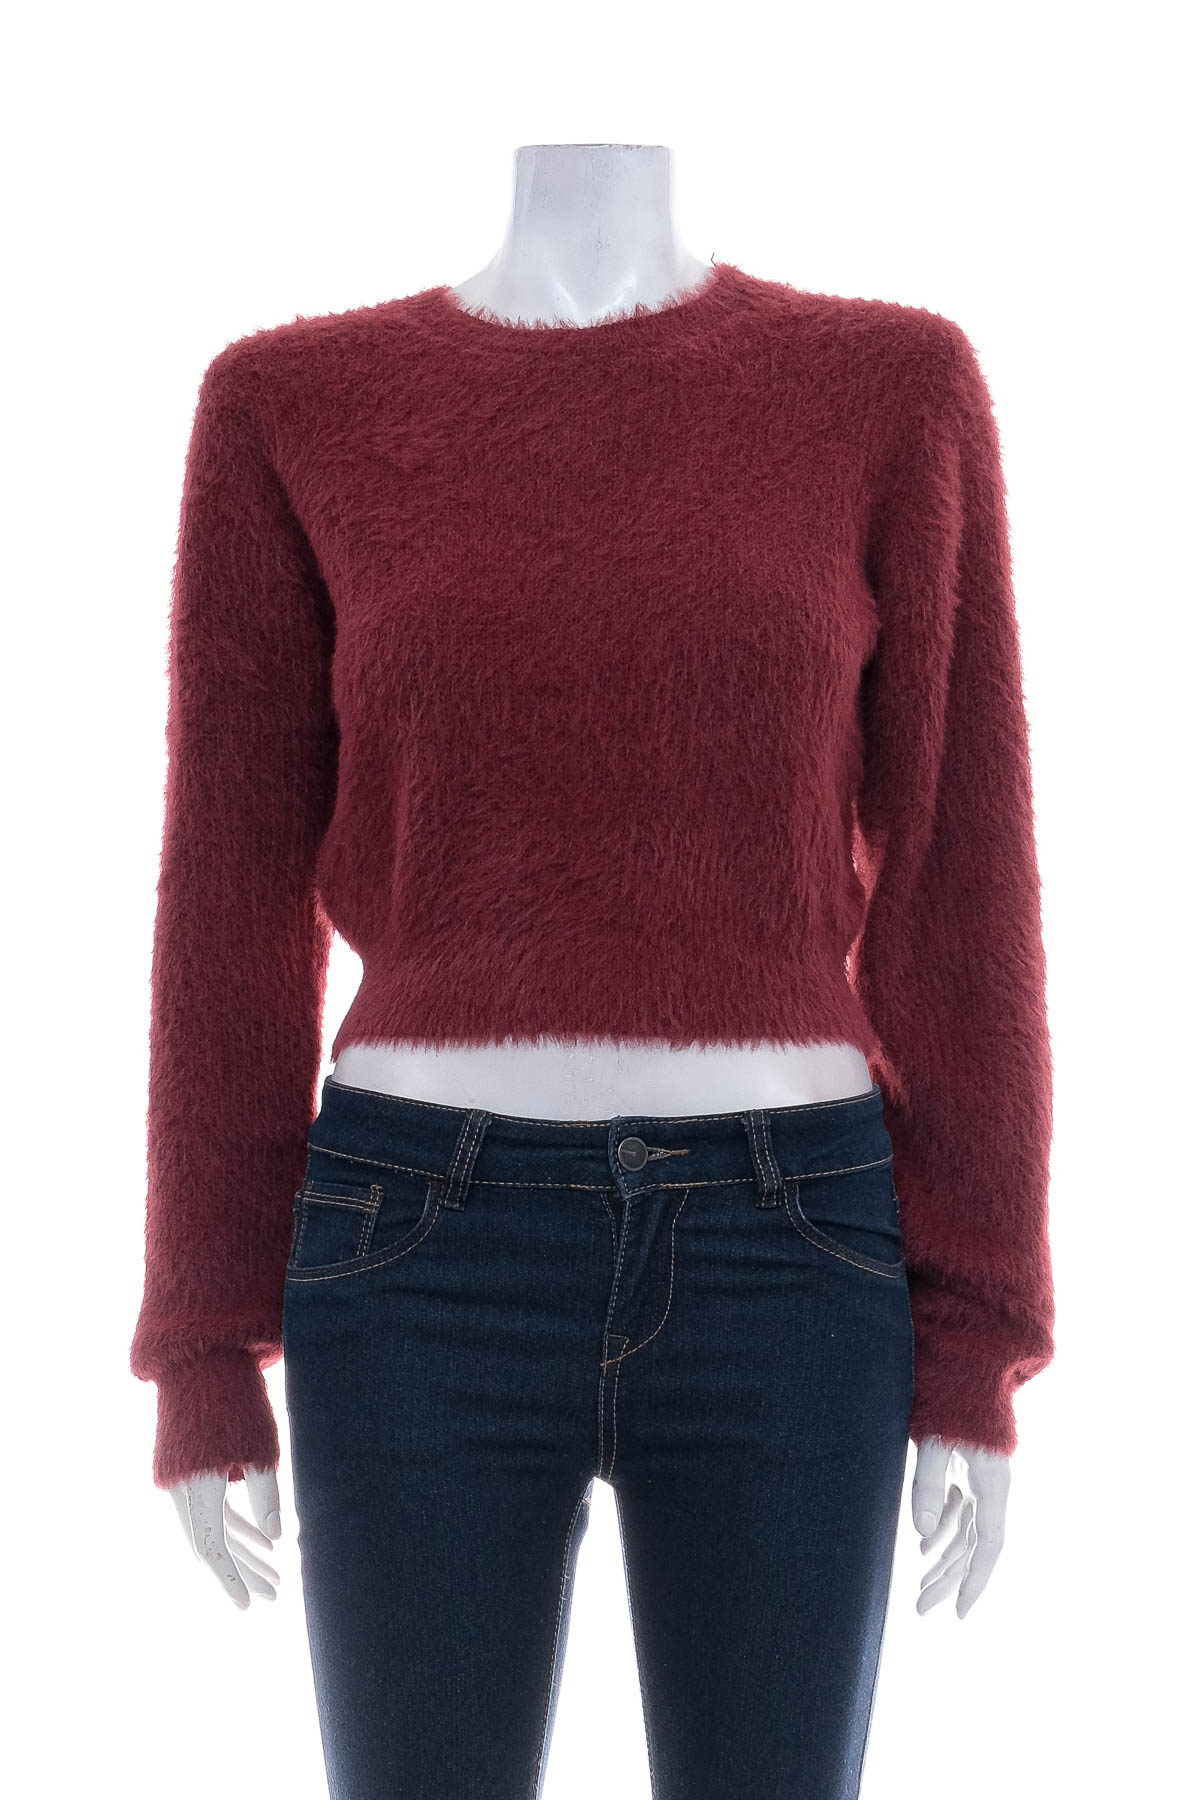 Women's sweater - FORE - 0